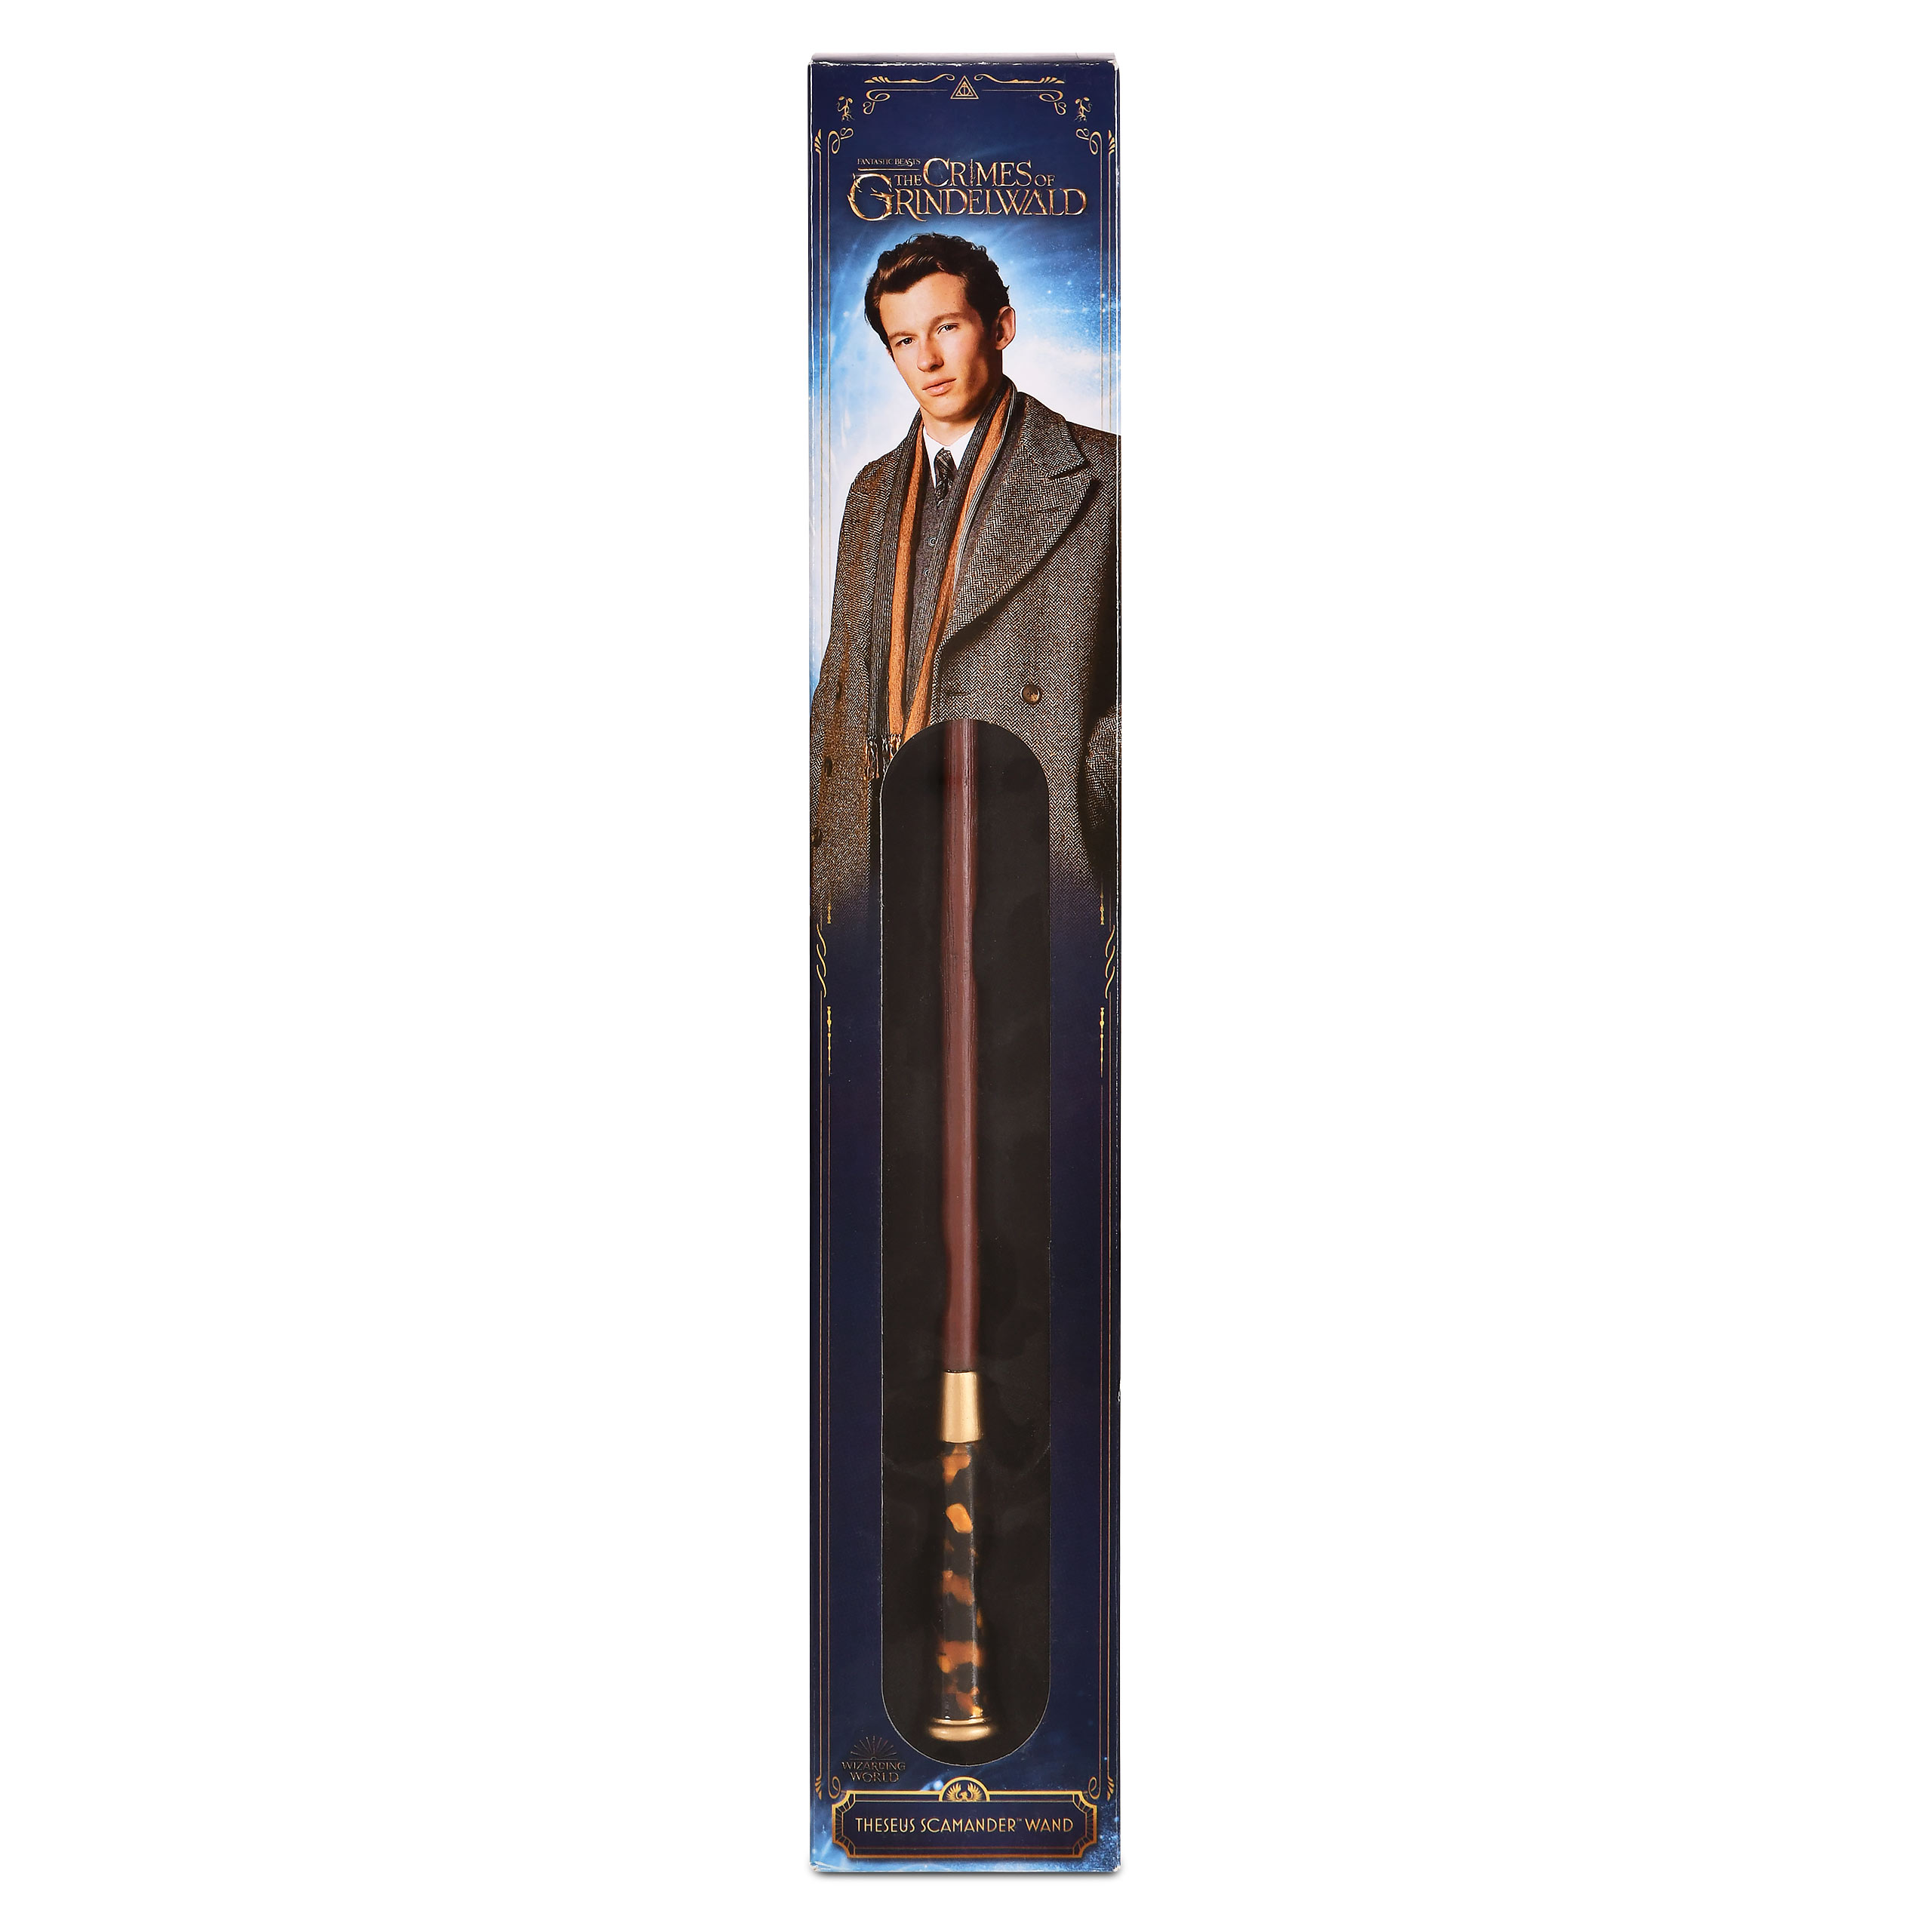 Theseus Scamander Wand in Blister - Fantastic Beasts